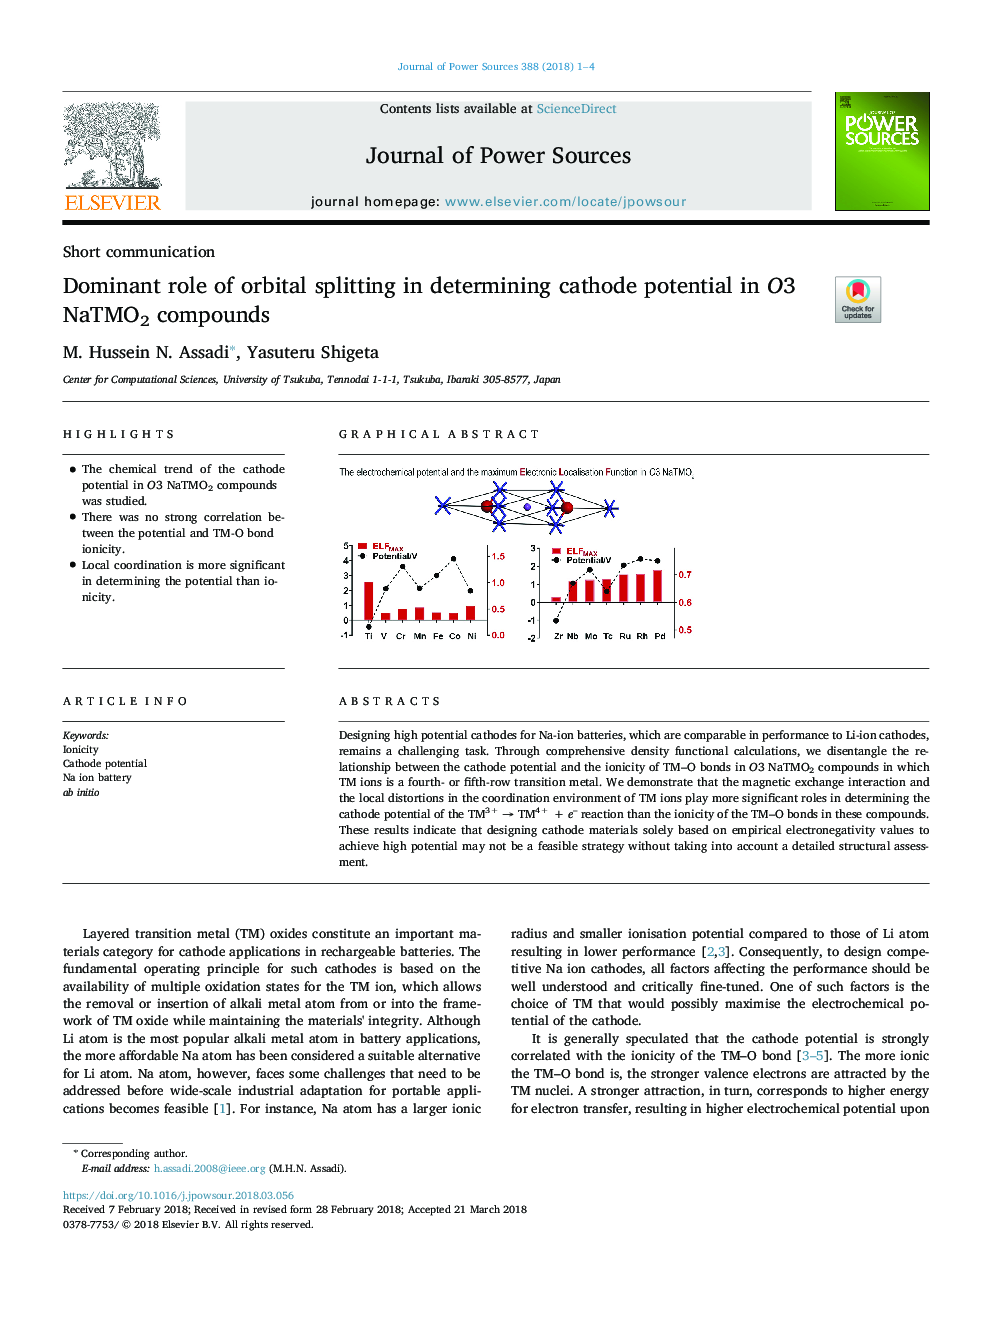 Dominant role of orbital splitting in determining cathode potential in O3 NaTMO2 compounds